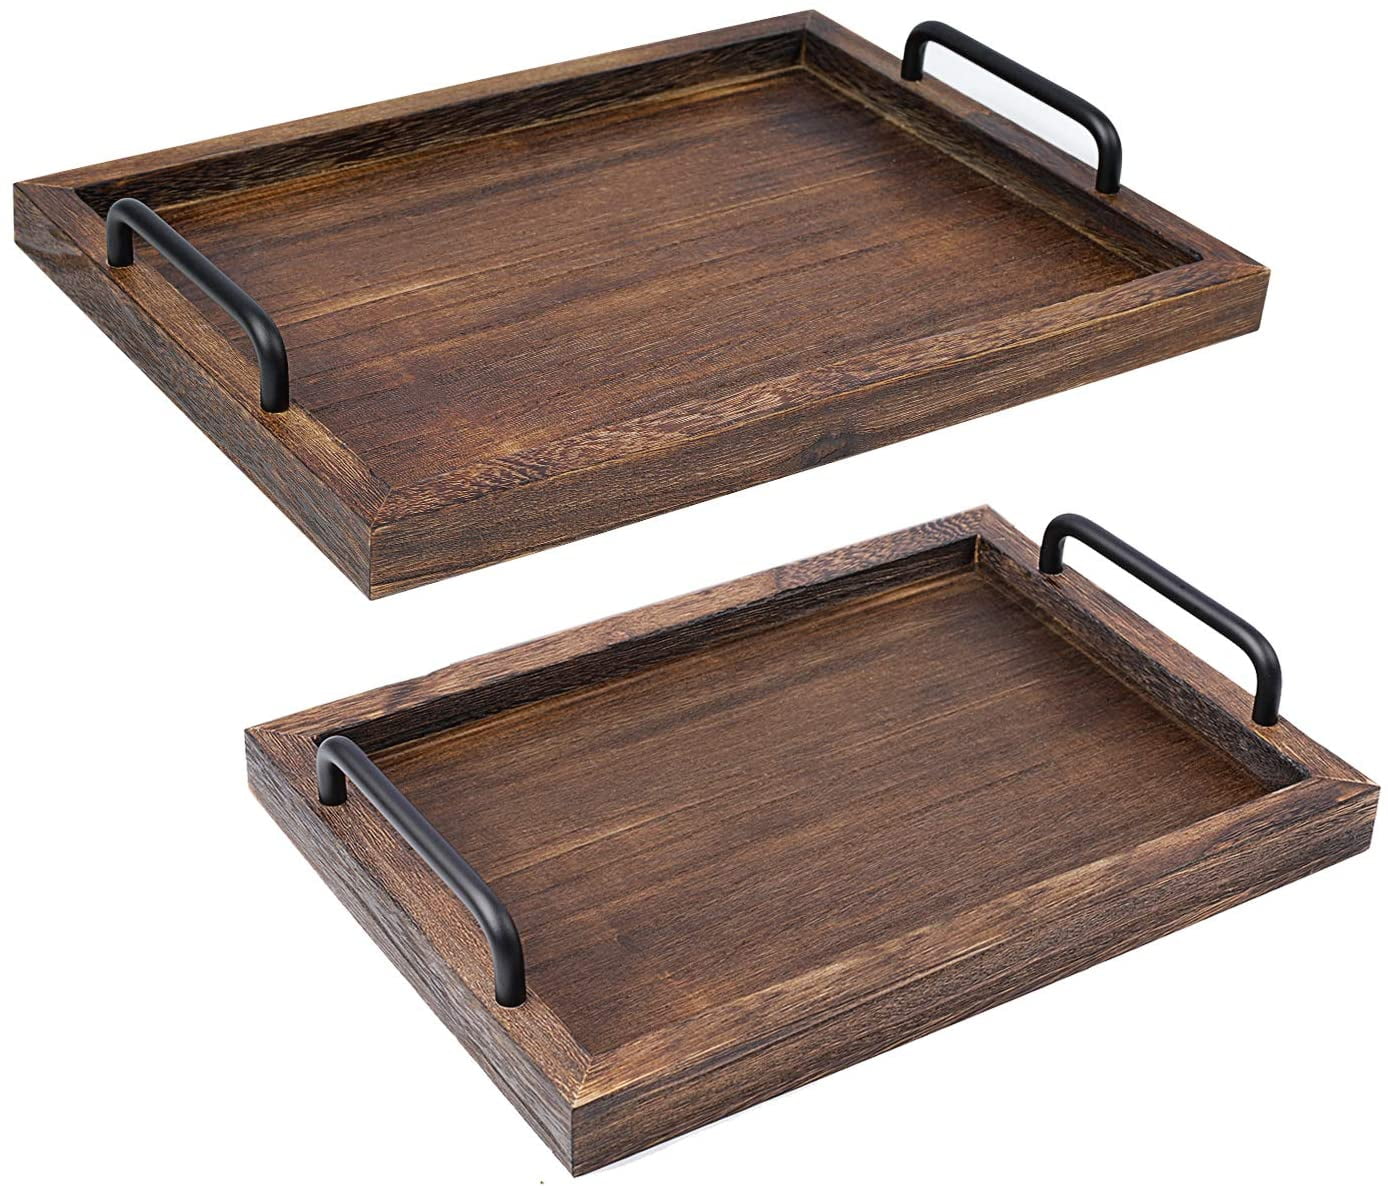 Unfinished Wood Nesting Trays, 2 Sets of 6 Wooden Crafting Trays, for Serving, Organizing, DIY Dcor, and Play Tray, by Woodpeckers, Size: Medium